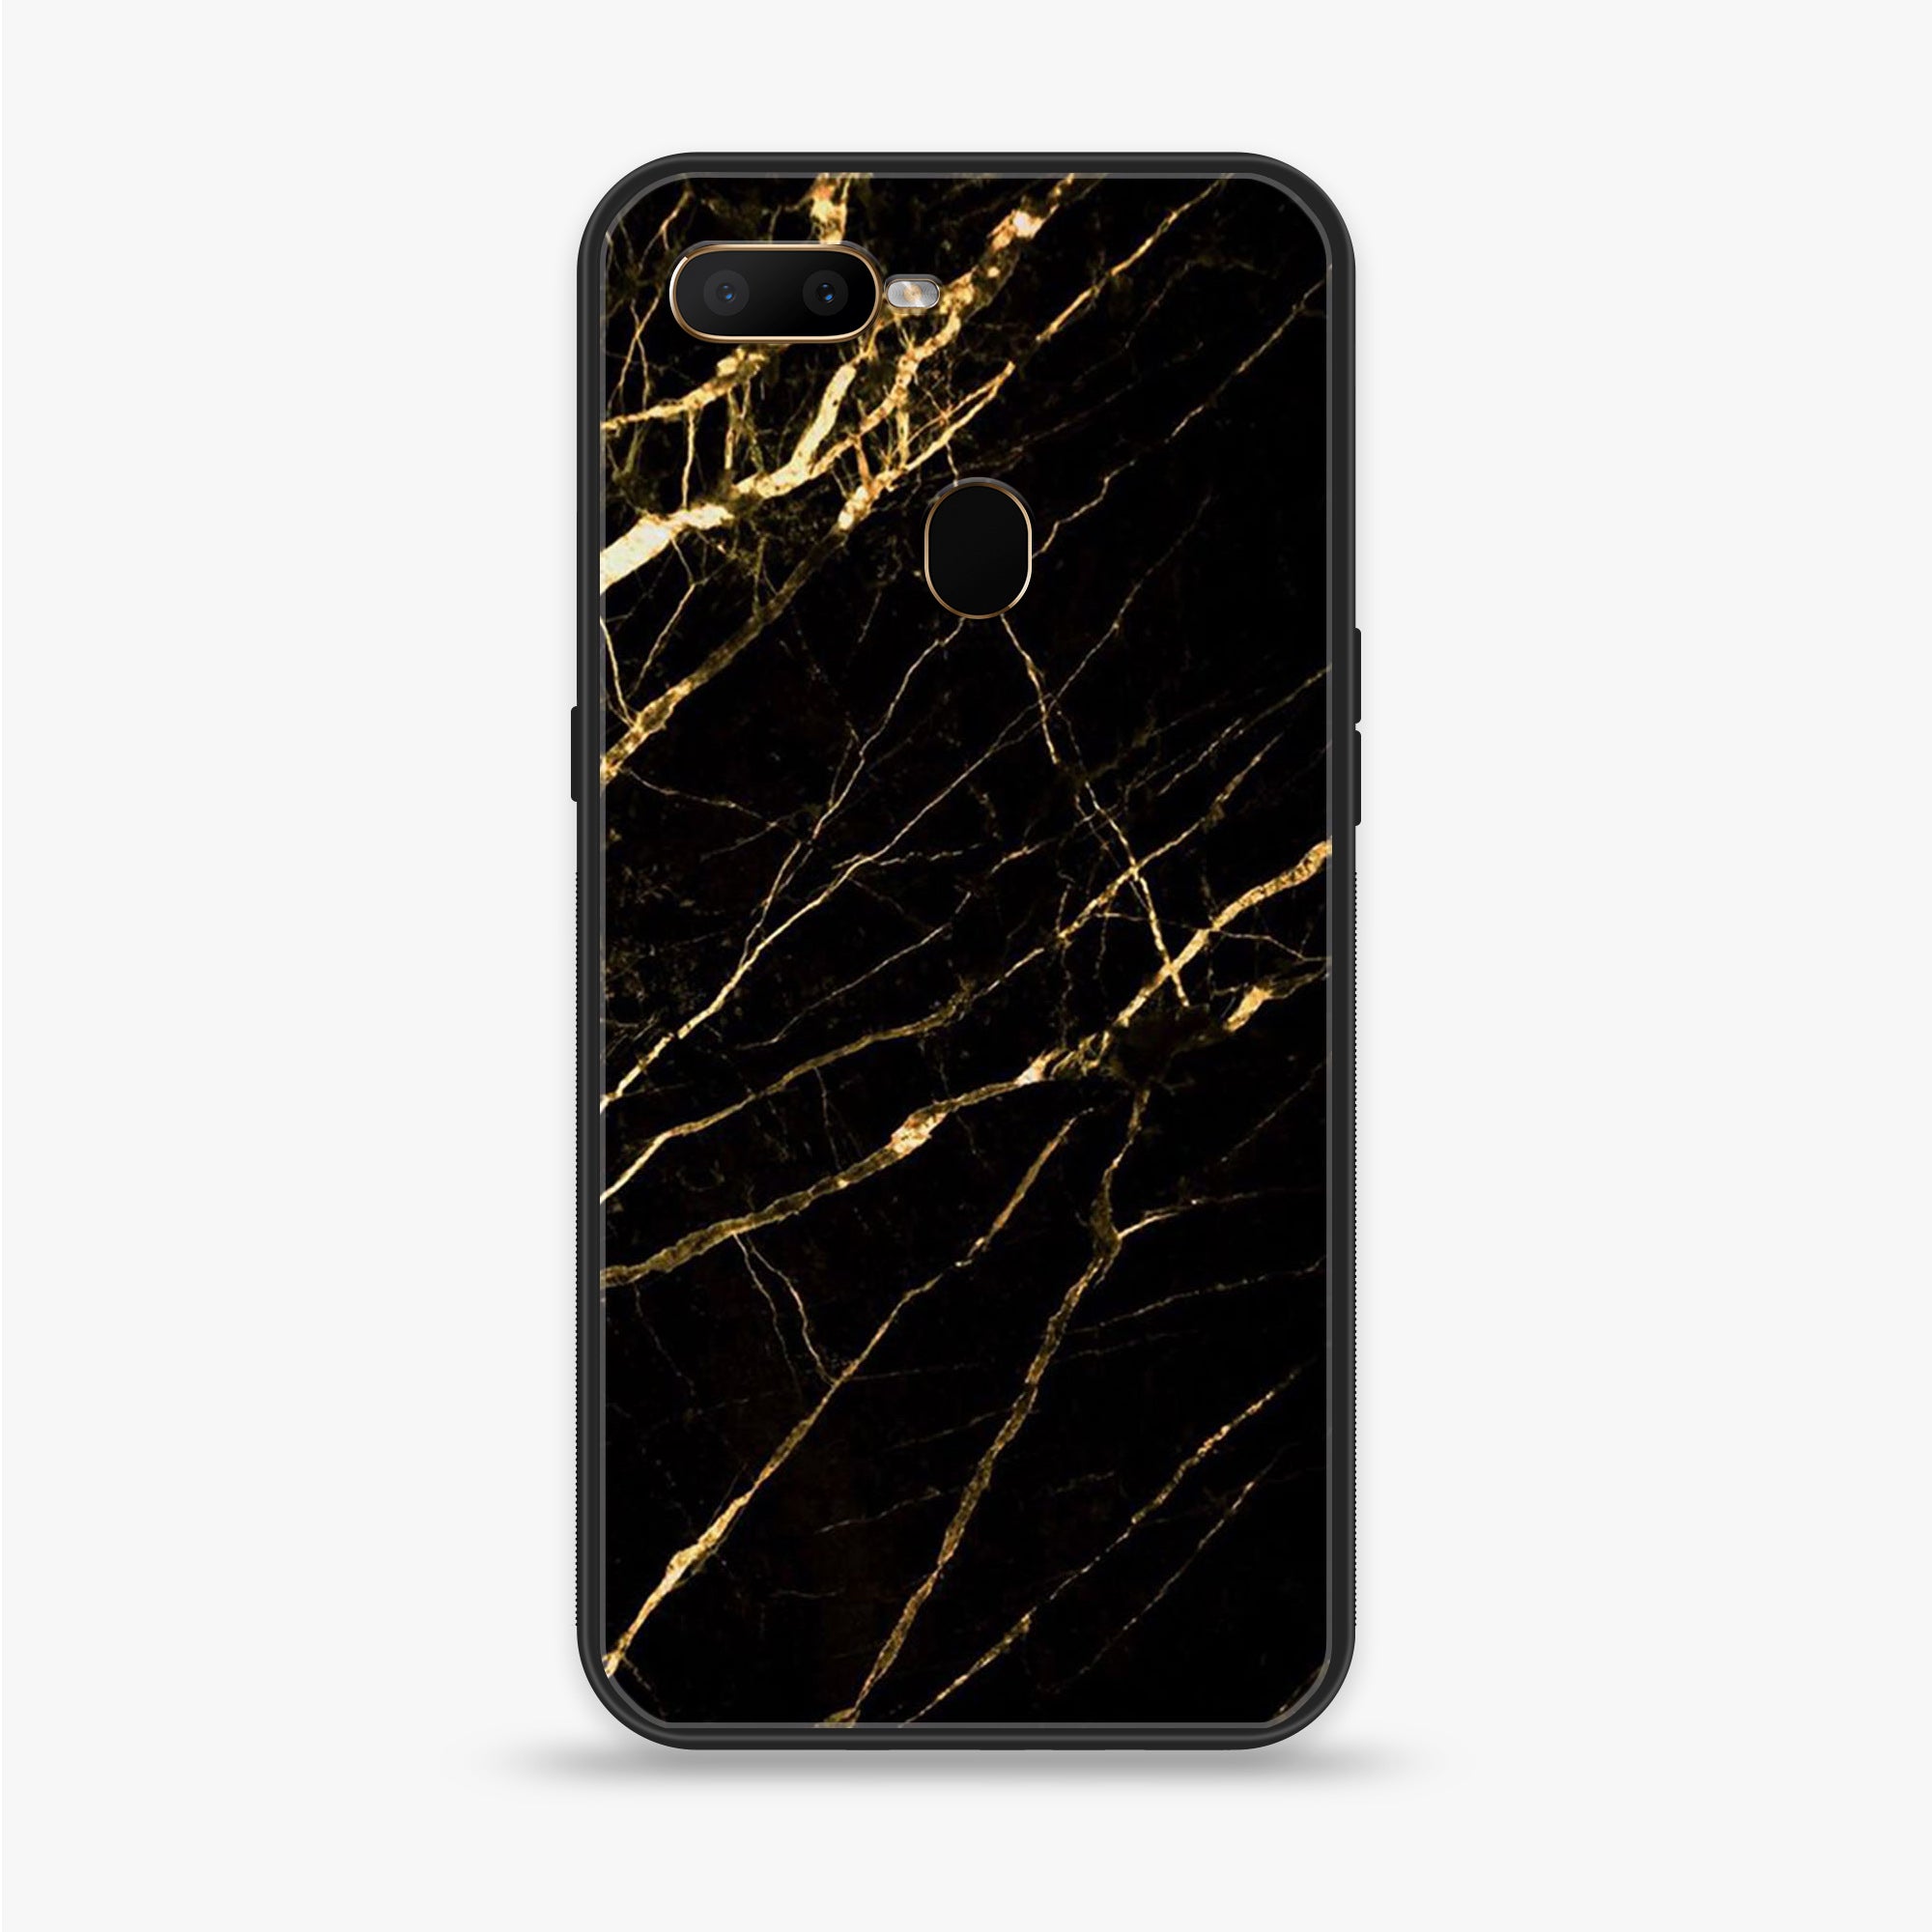 OPPO A5s - Black Marble Series - Premium Printed Glass soft Bumper shock Proof Case